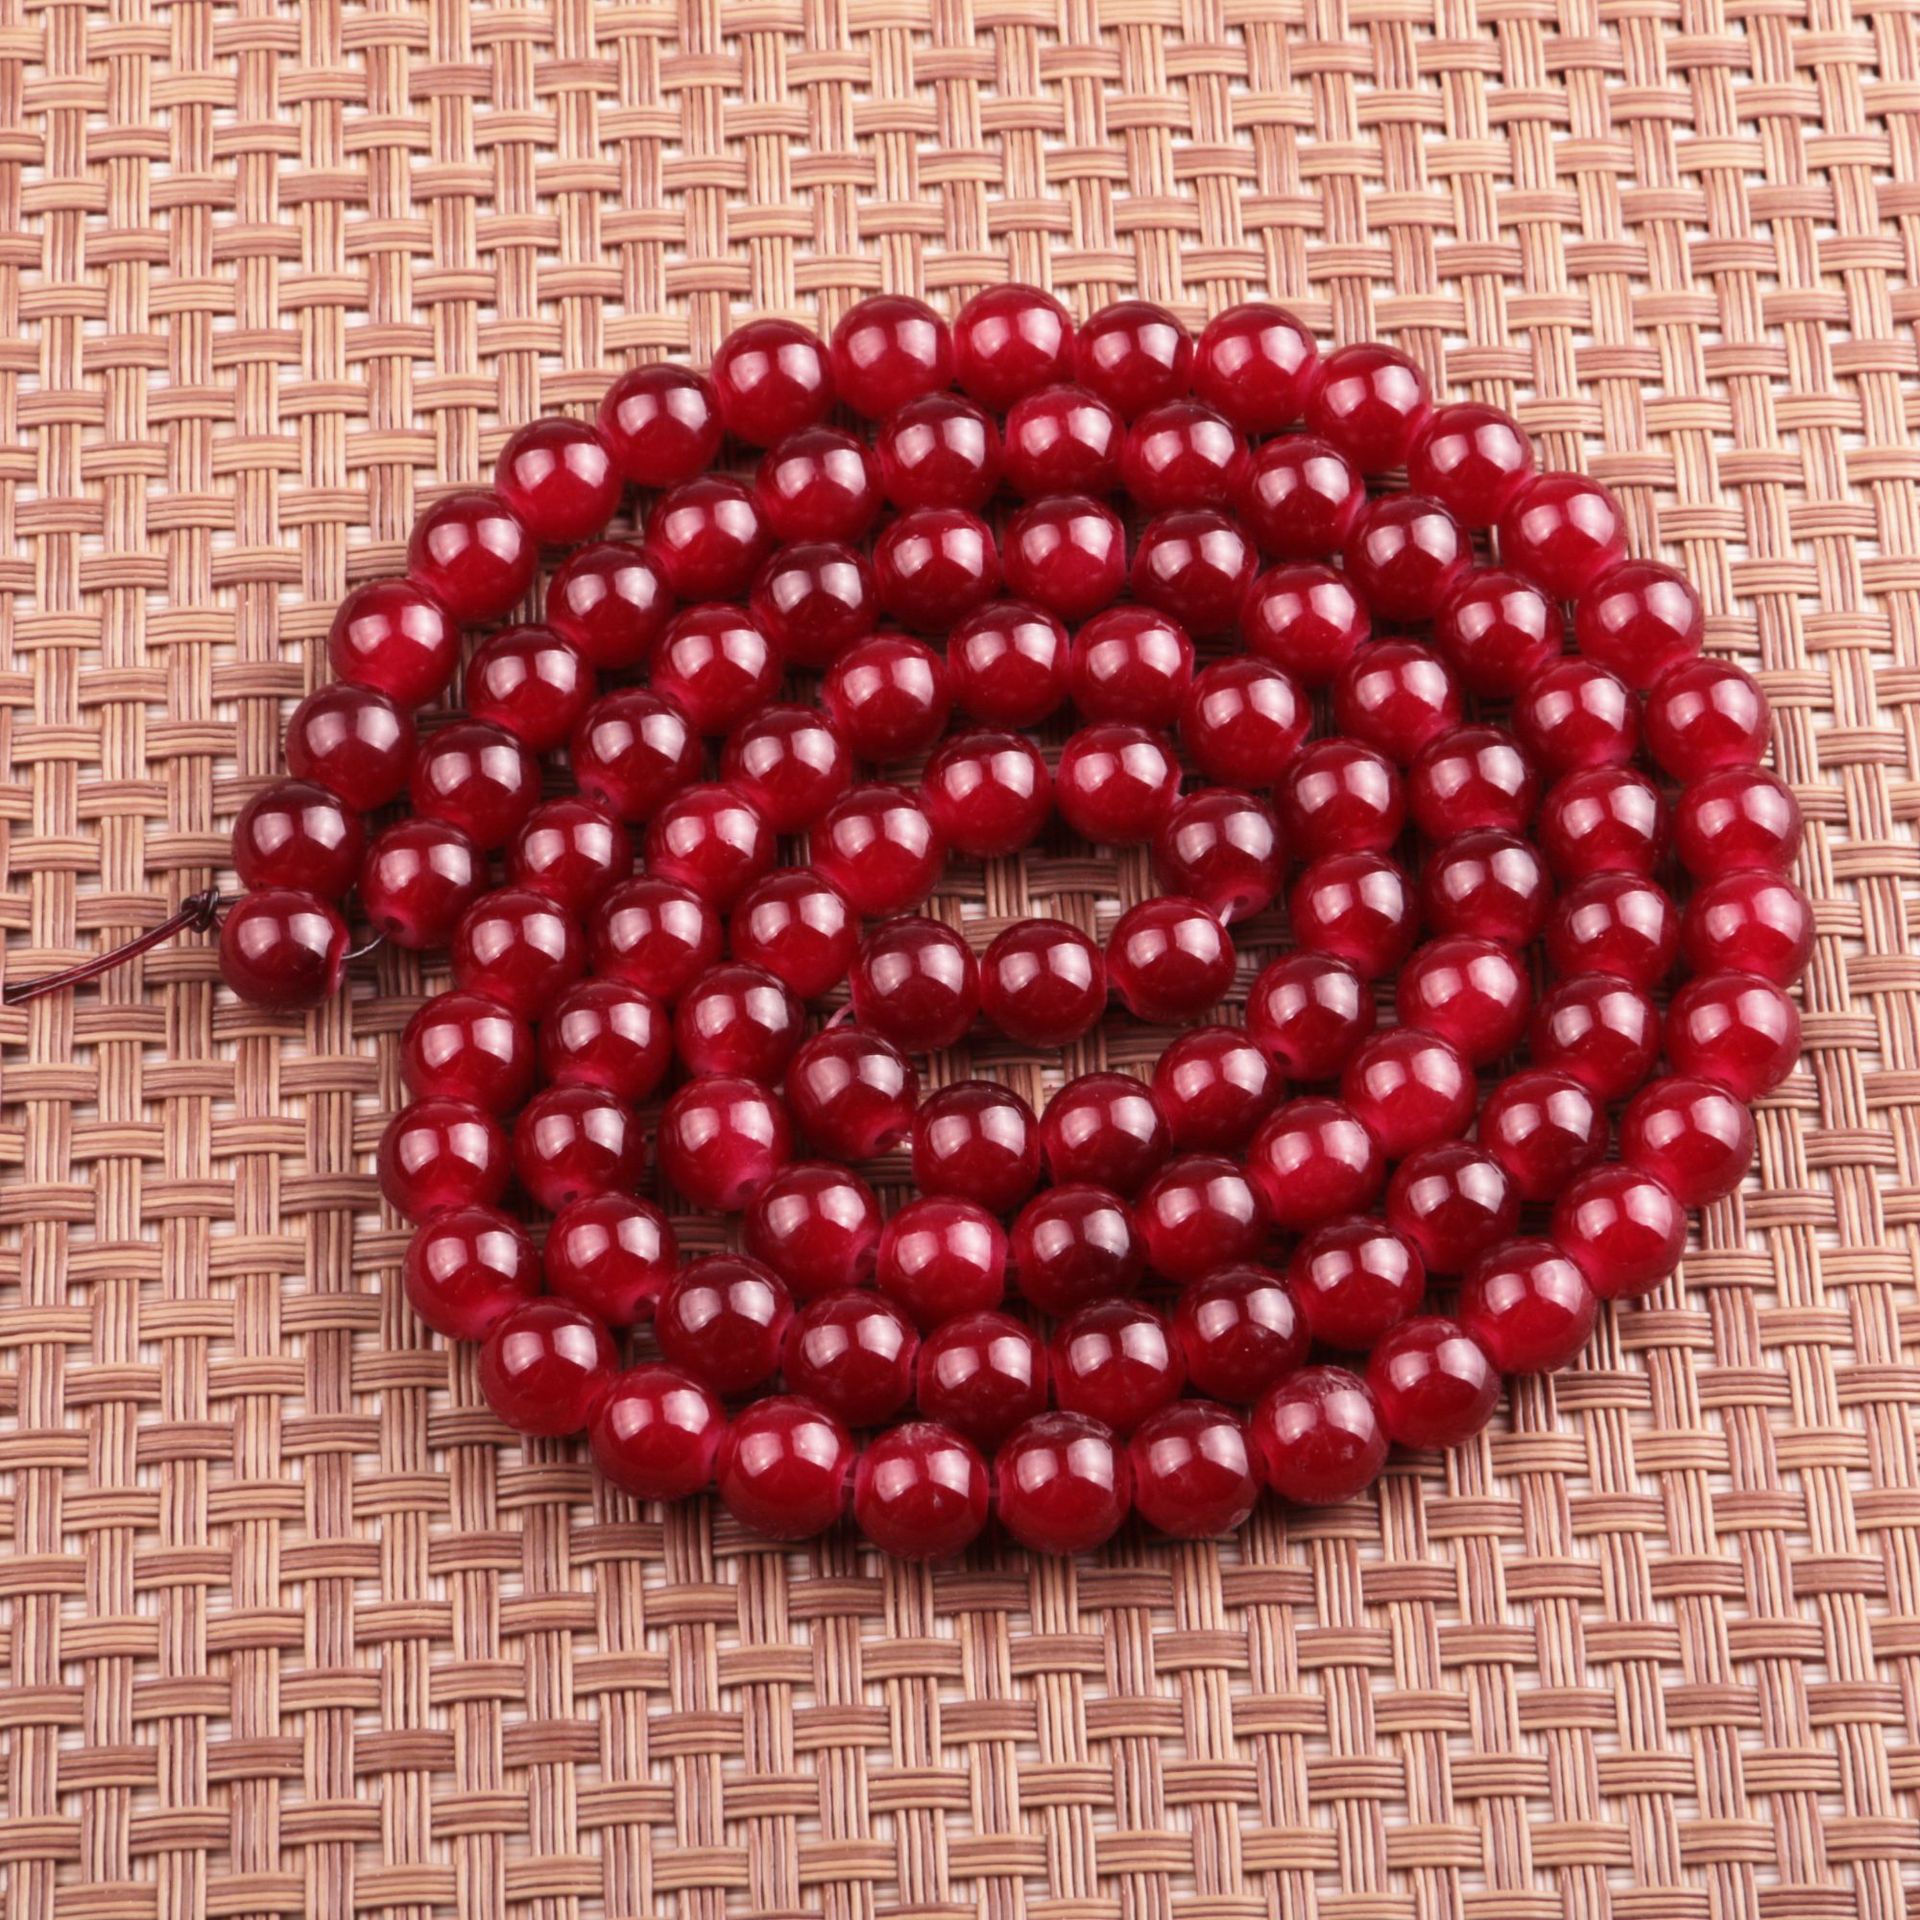 Red 8 mm